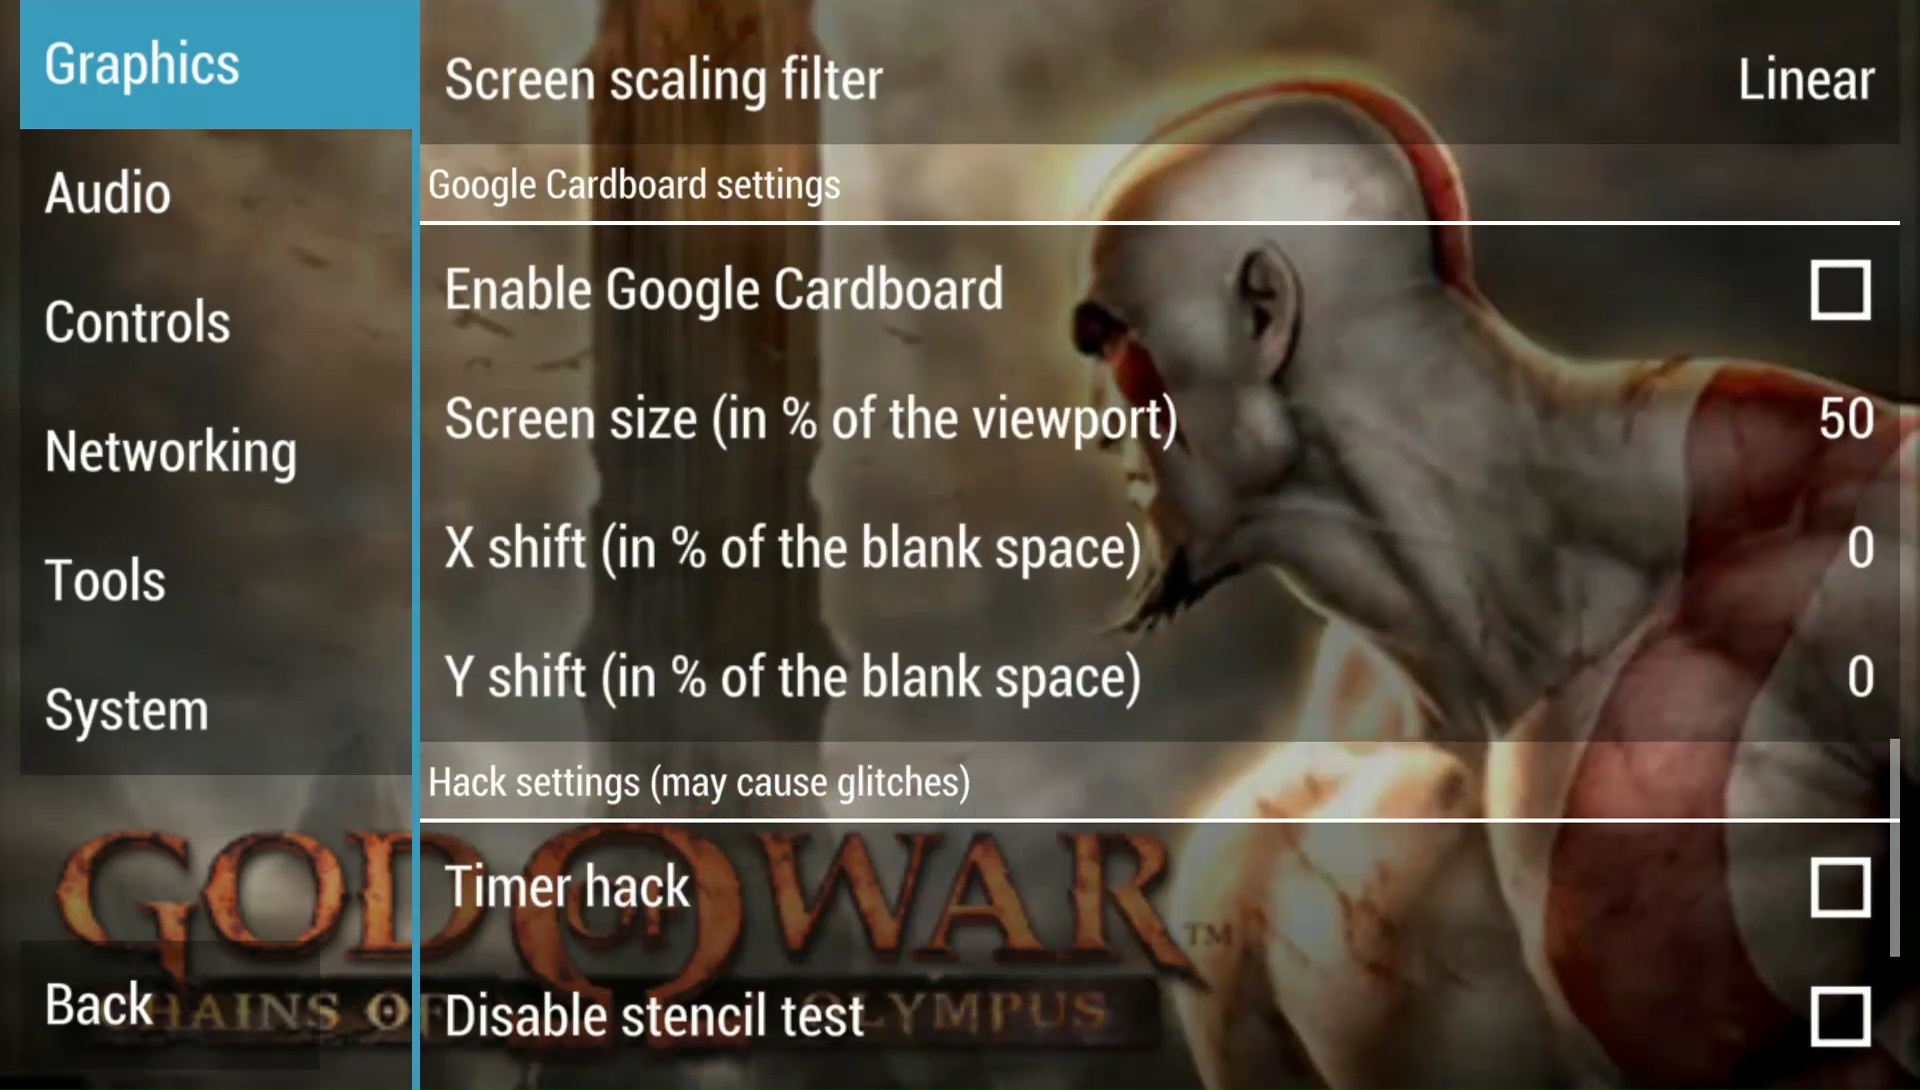 God of war chains of olympus ppsspp emulator cheat codes